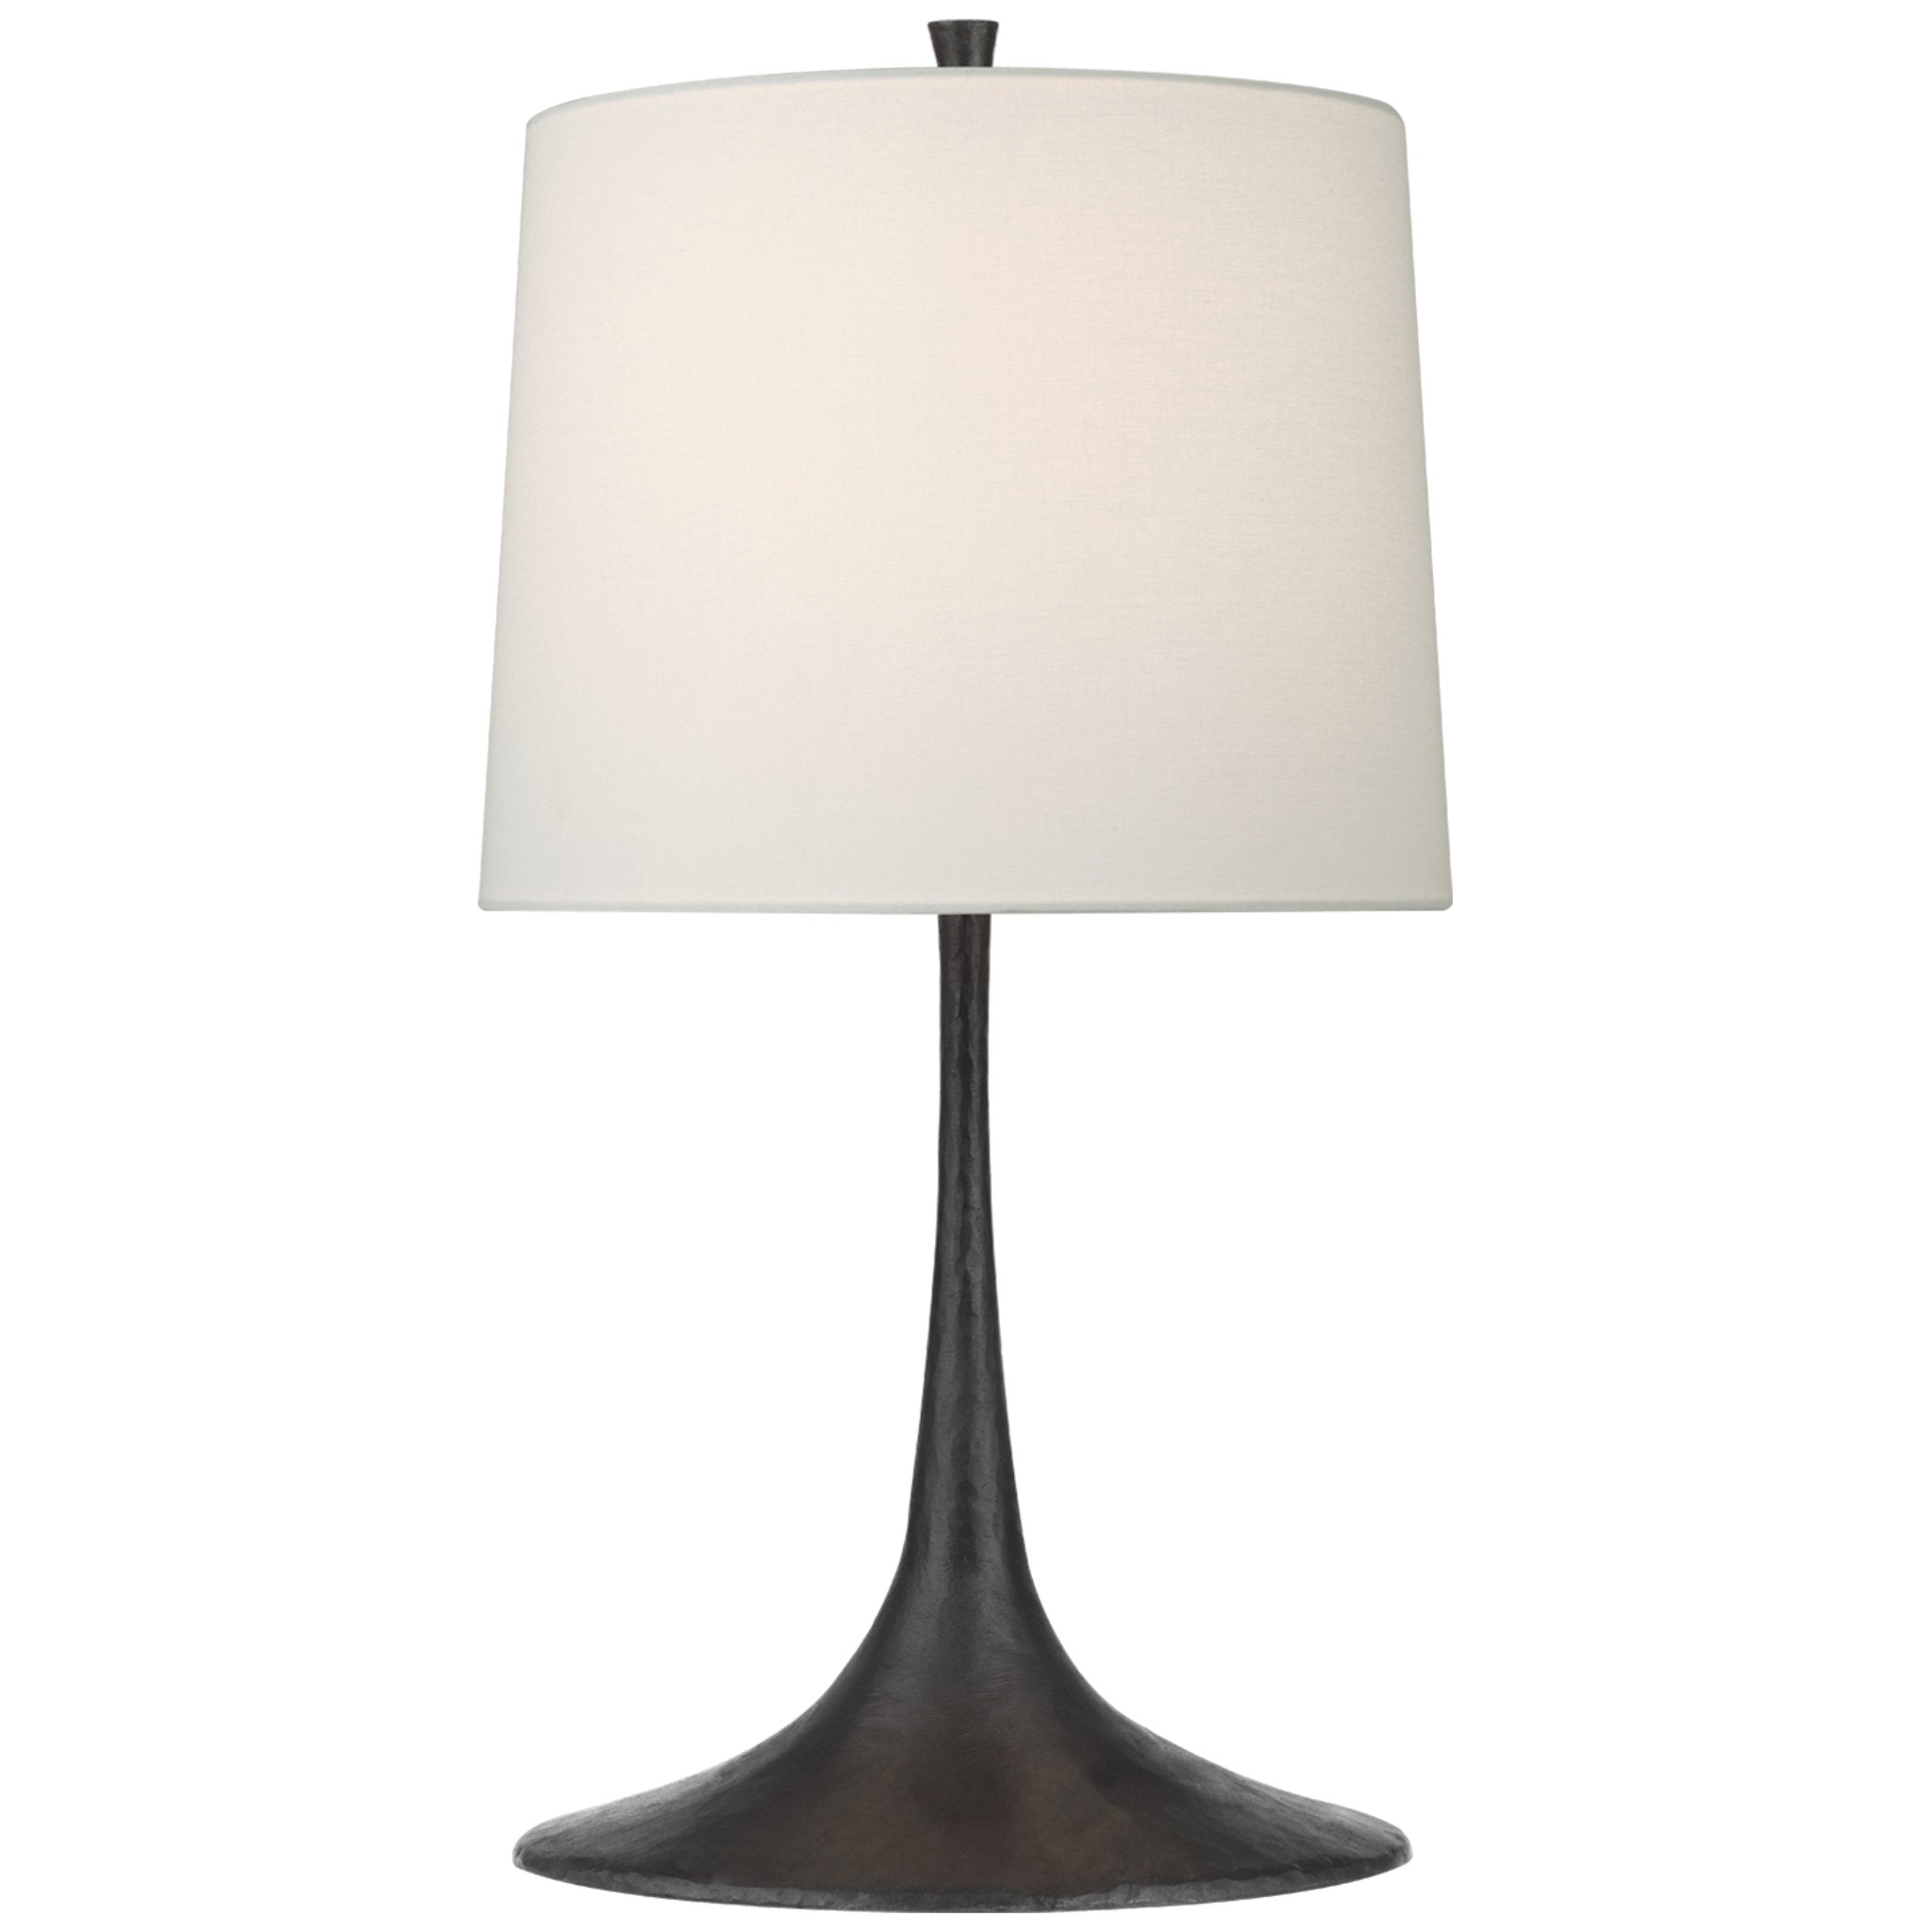 Barbara Barry Oscar Medium Sculpted Table Lamp in Aged Iron with Linen Shade